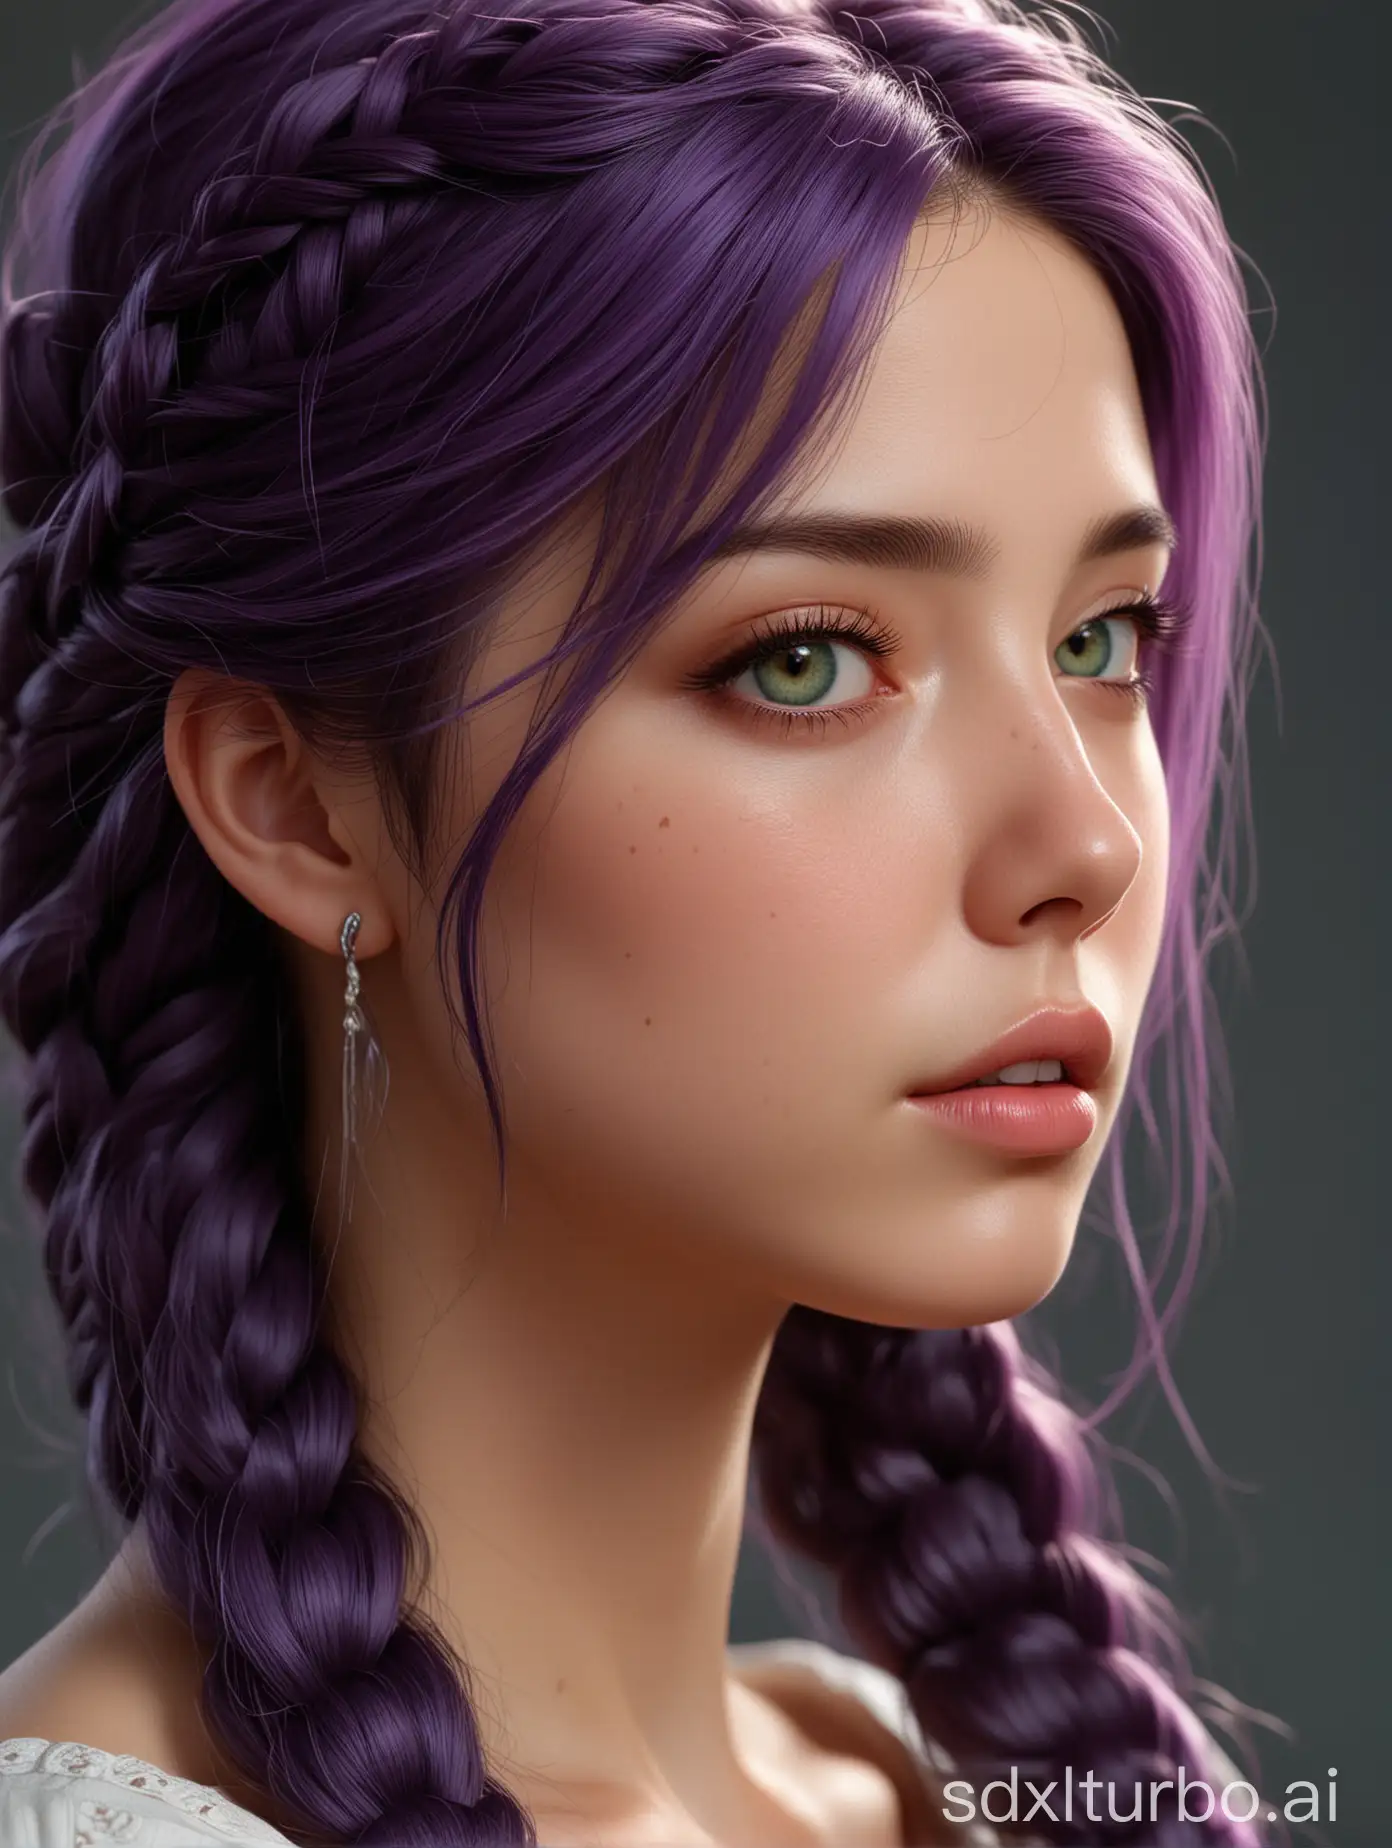 Portrait-of-a-Beautiful-Girl-with-Purple-Hair-and-Green-Eyes